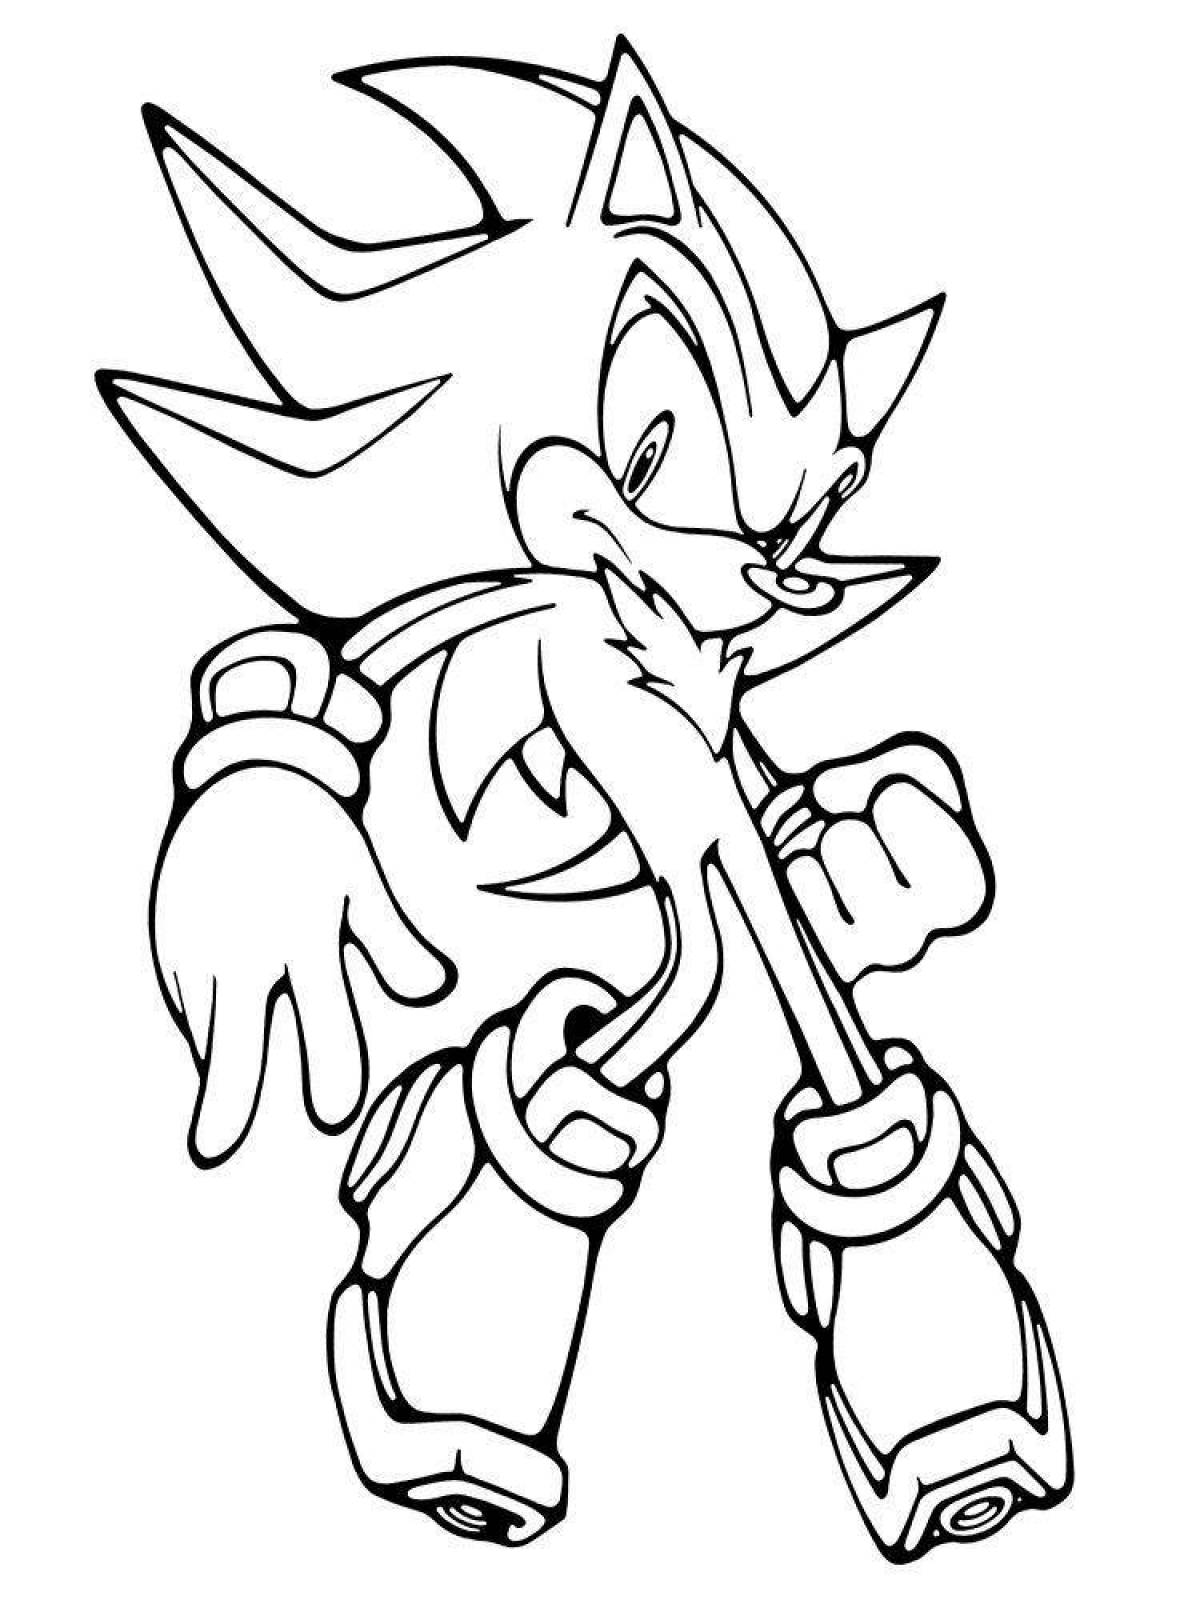 Bright sonic coloring book